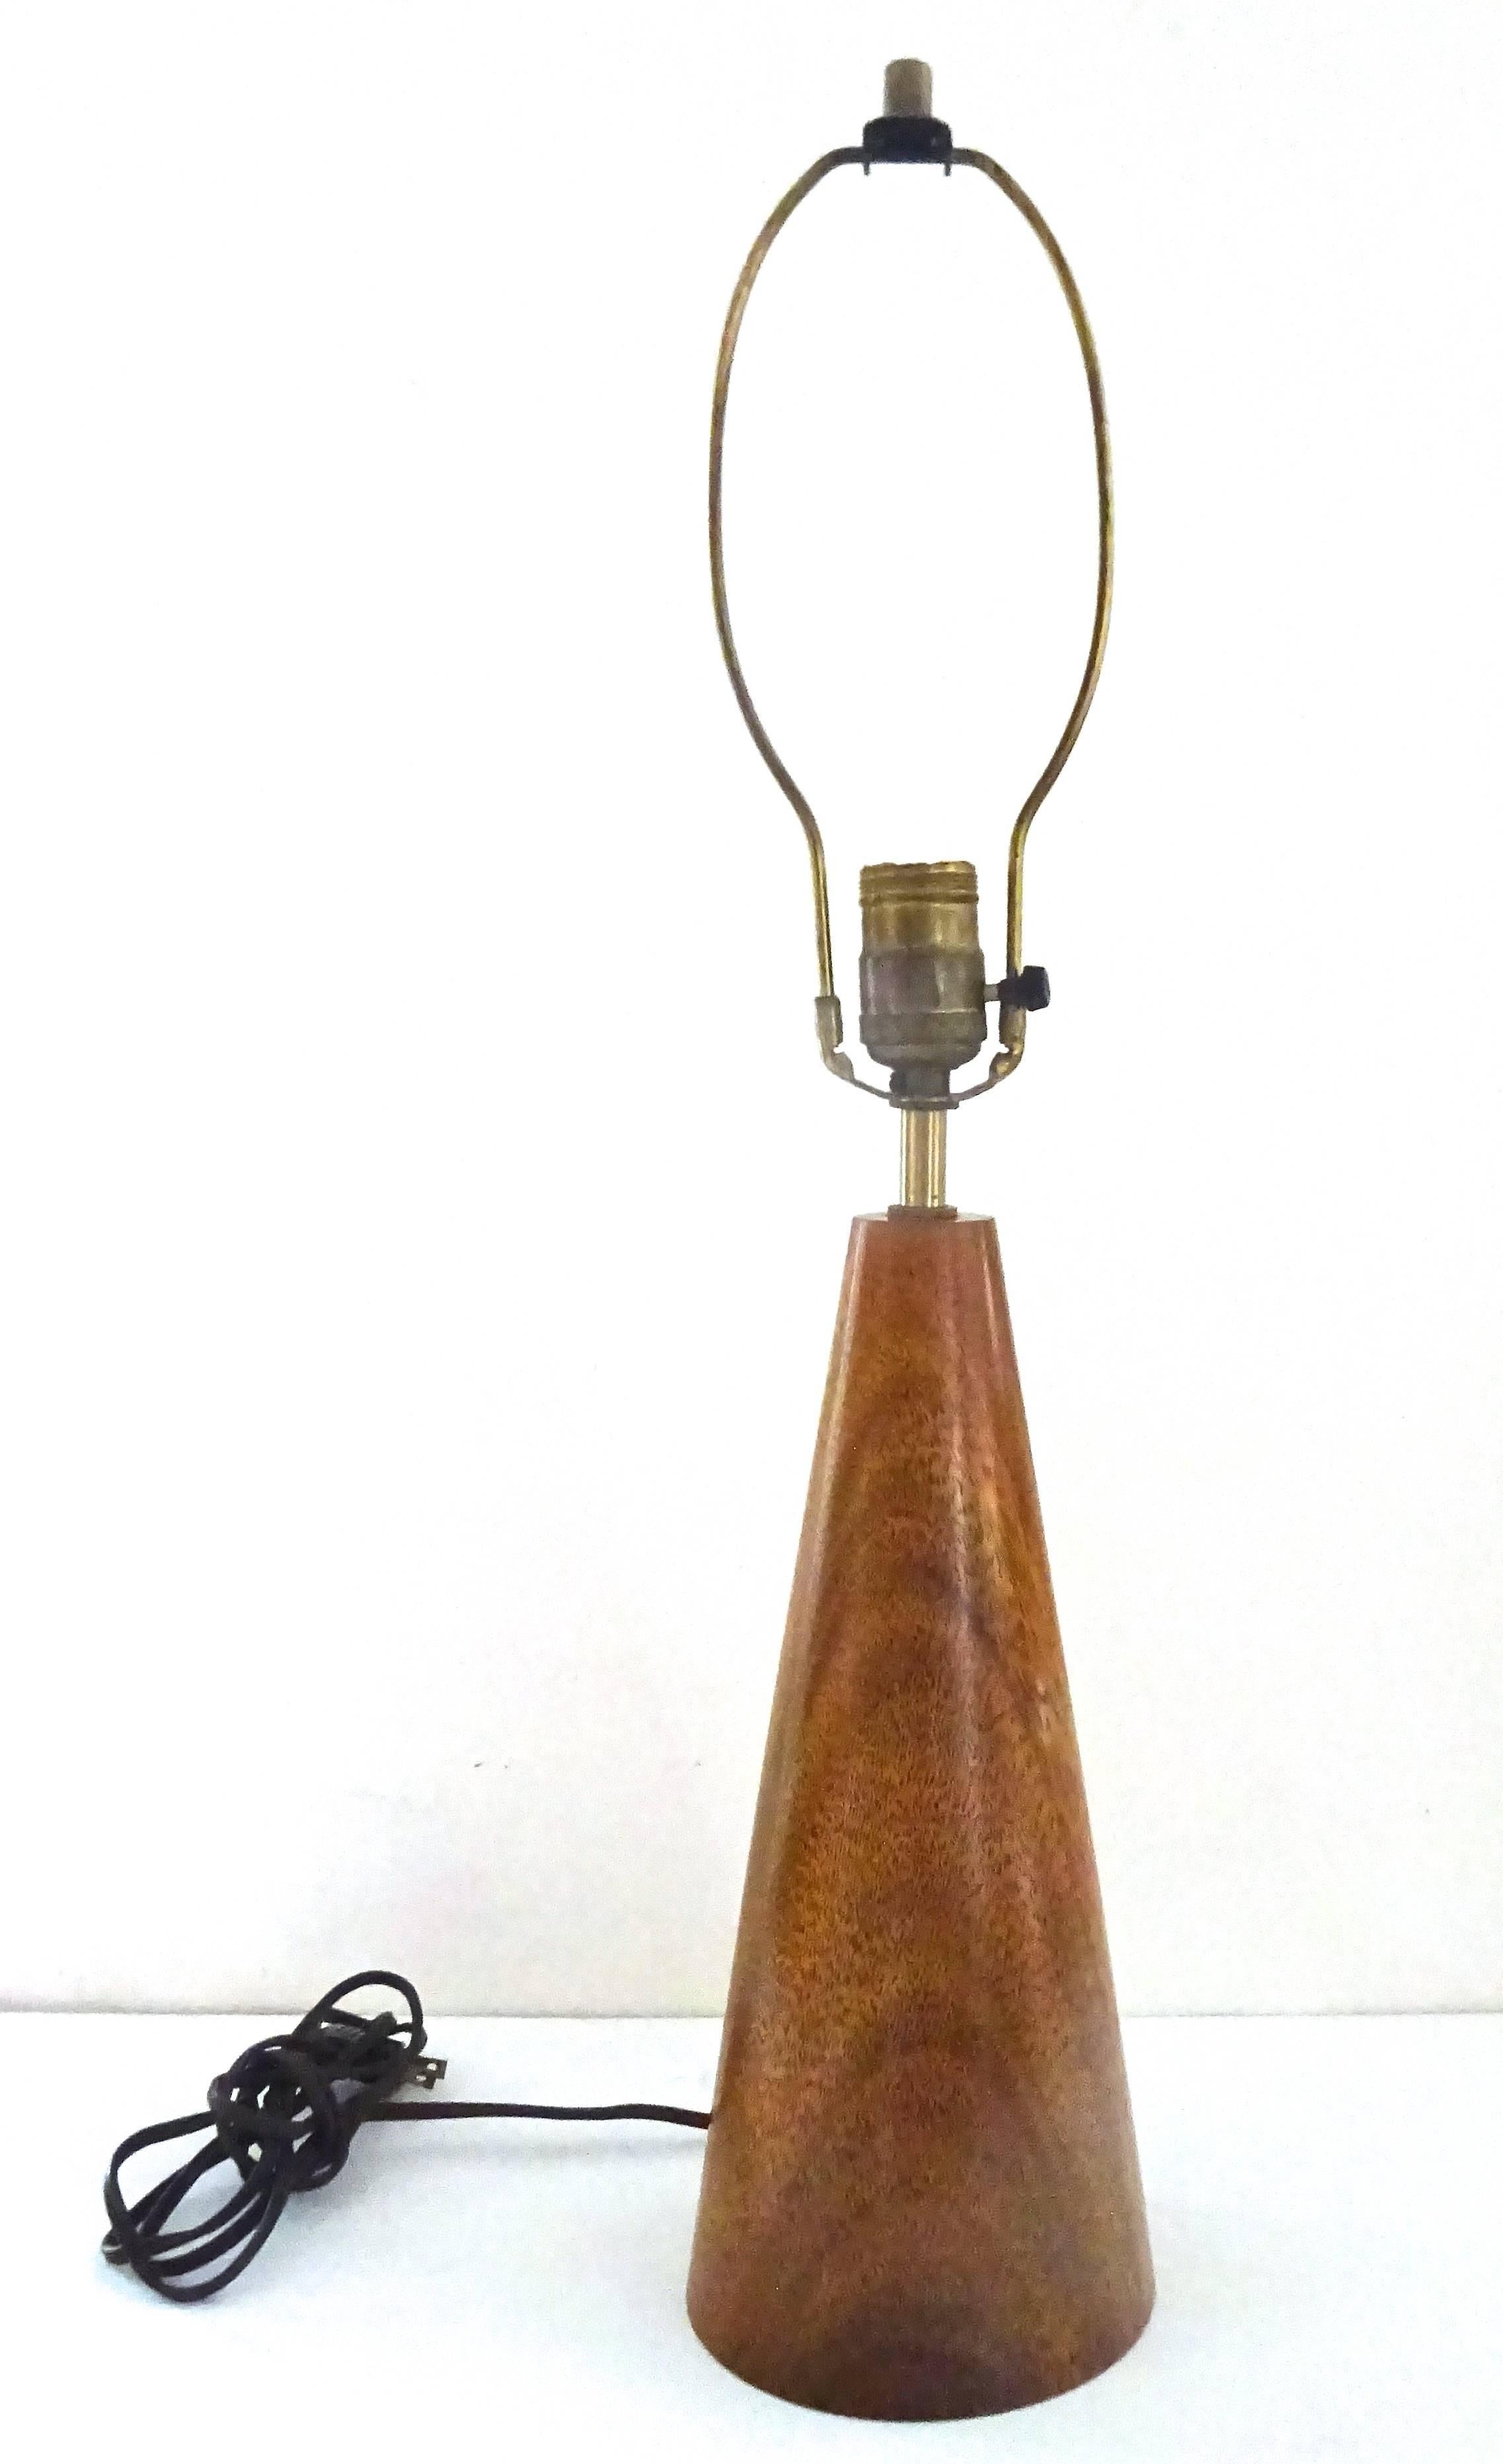 Sculptural 1960s Bob Stocksdale studio exotic wood table lamp

Wood portion alone is 12 1/4